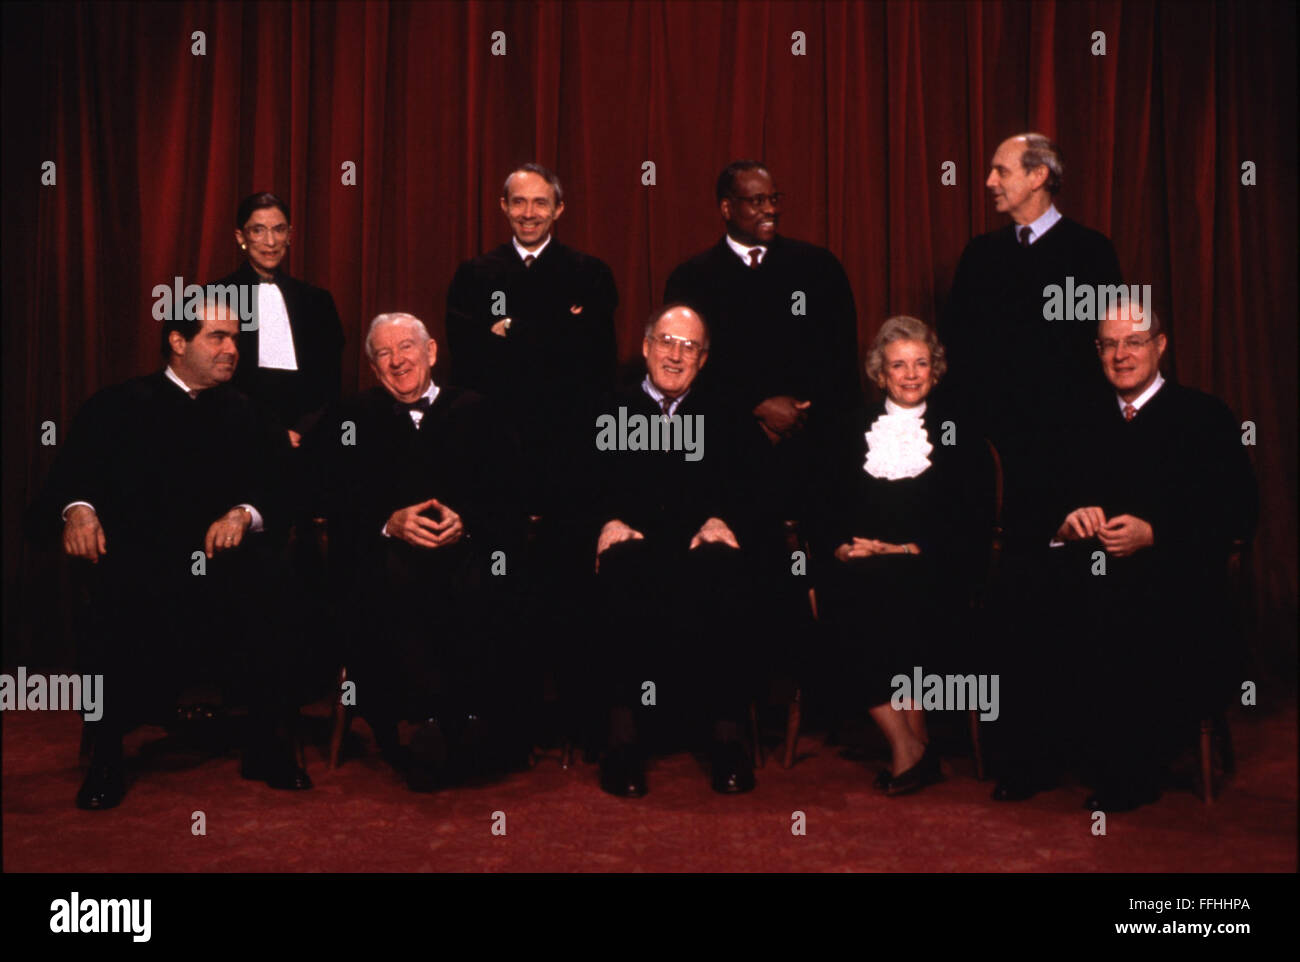 Washington, DC, USA. 2nd Dec, 2000. File photo from November 10, 1994 -- Latest group photo of the Justices of the United States Supreme Court. (L-R) Associate Justice Antonin Scalia; Associate Justice Ruth Bader Ginsburg; Associate Justice John Paul Stevens; Associate Justice David Hackett Souter; Chief Justice William H. Rehnquist; Associate Justice Clarence Thomas; Associate Justice Sandra Day O'Connor; Associate Justice Stephen G. Breyer; Associate Justice Anthony M. Kennedy.Credit: Corbis Sygma © CNP/ZUMA Wire/Alamy Live News Stock Photo